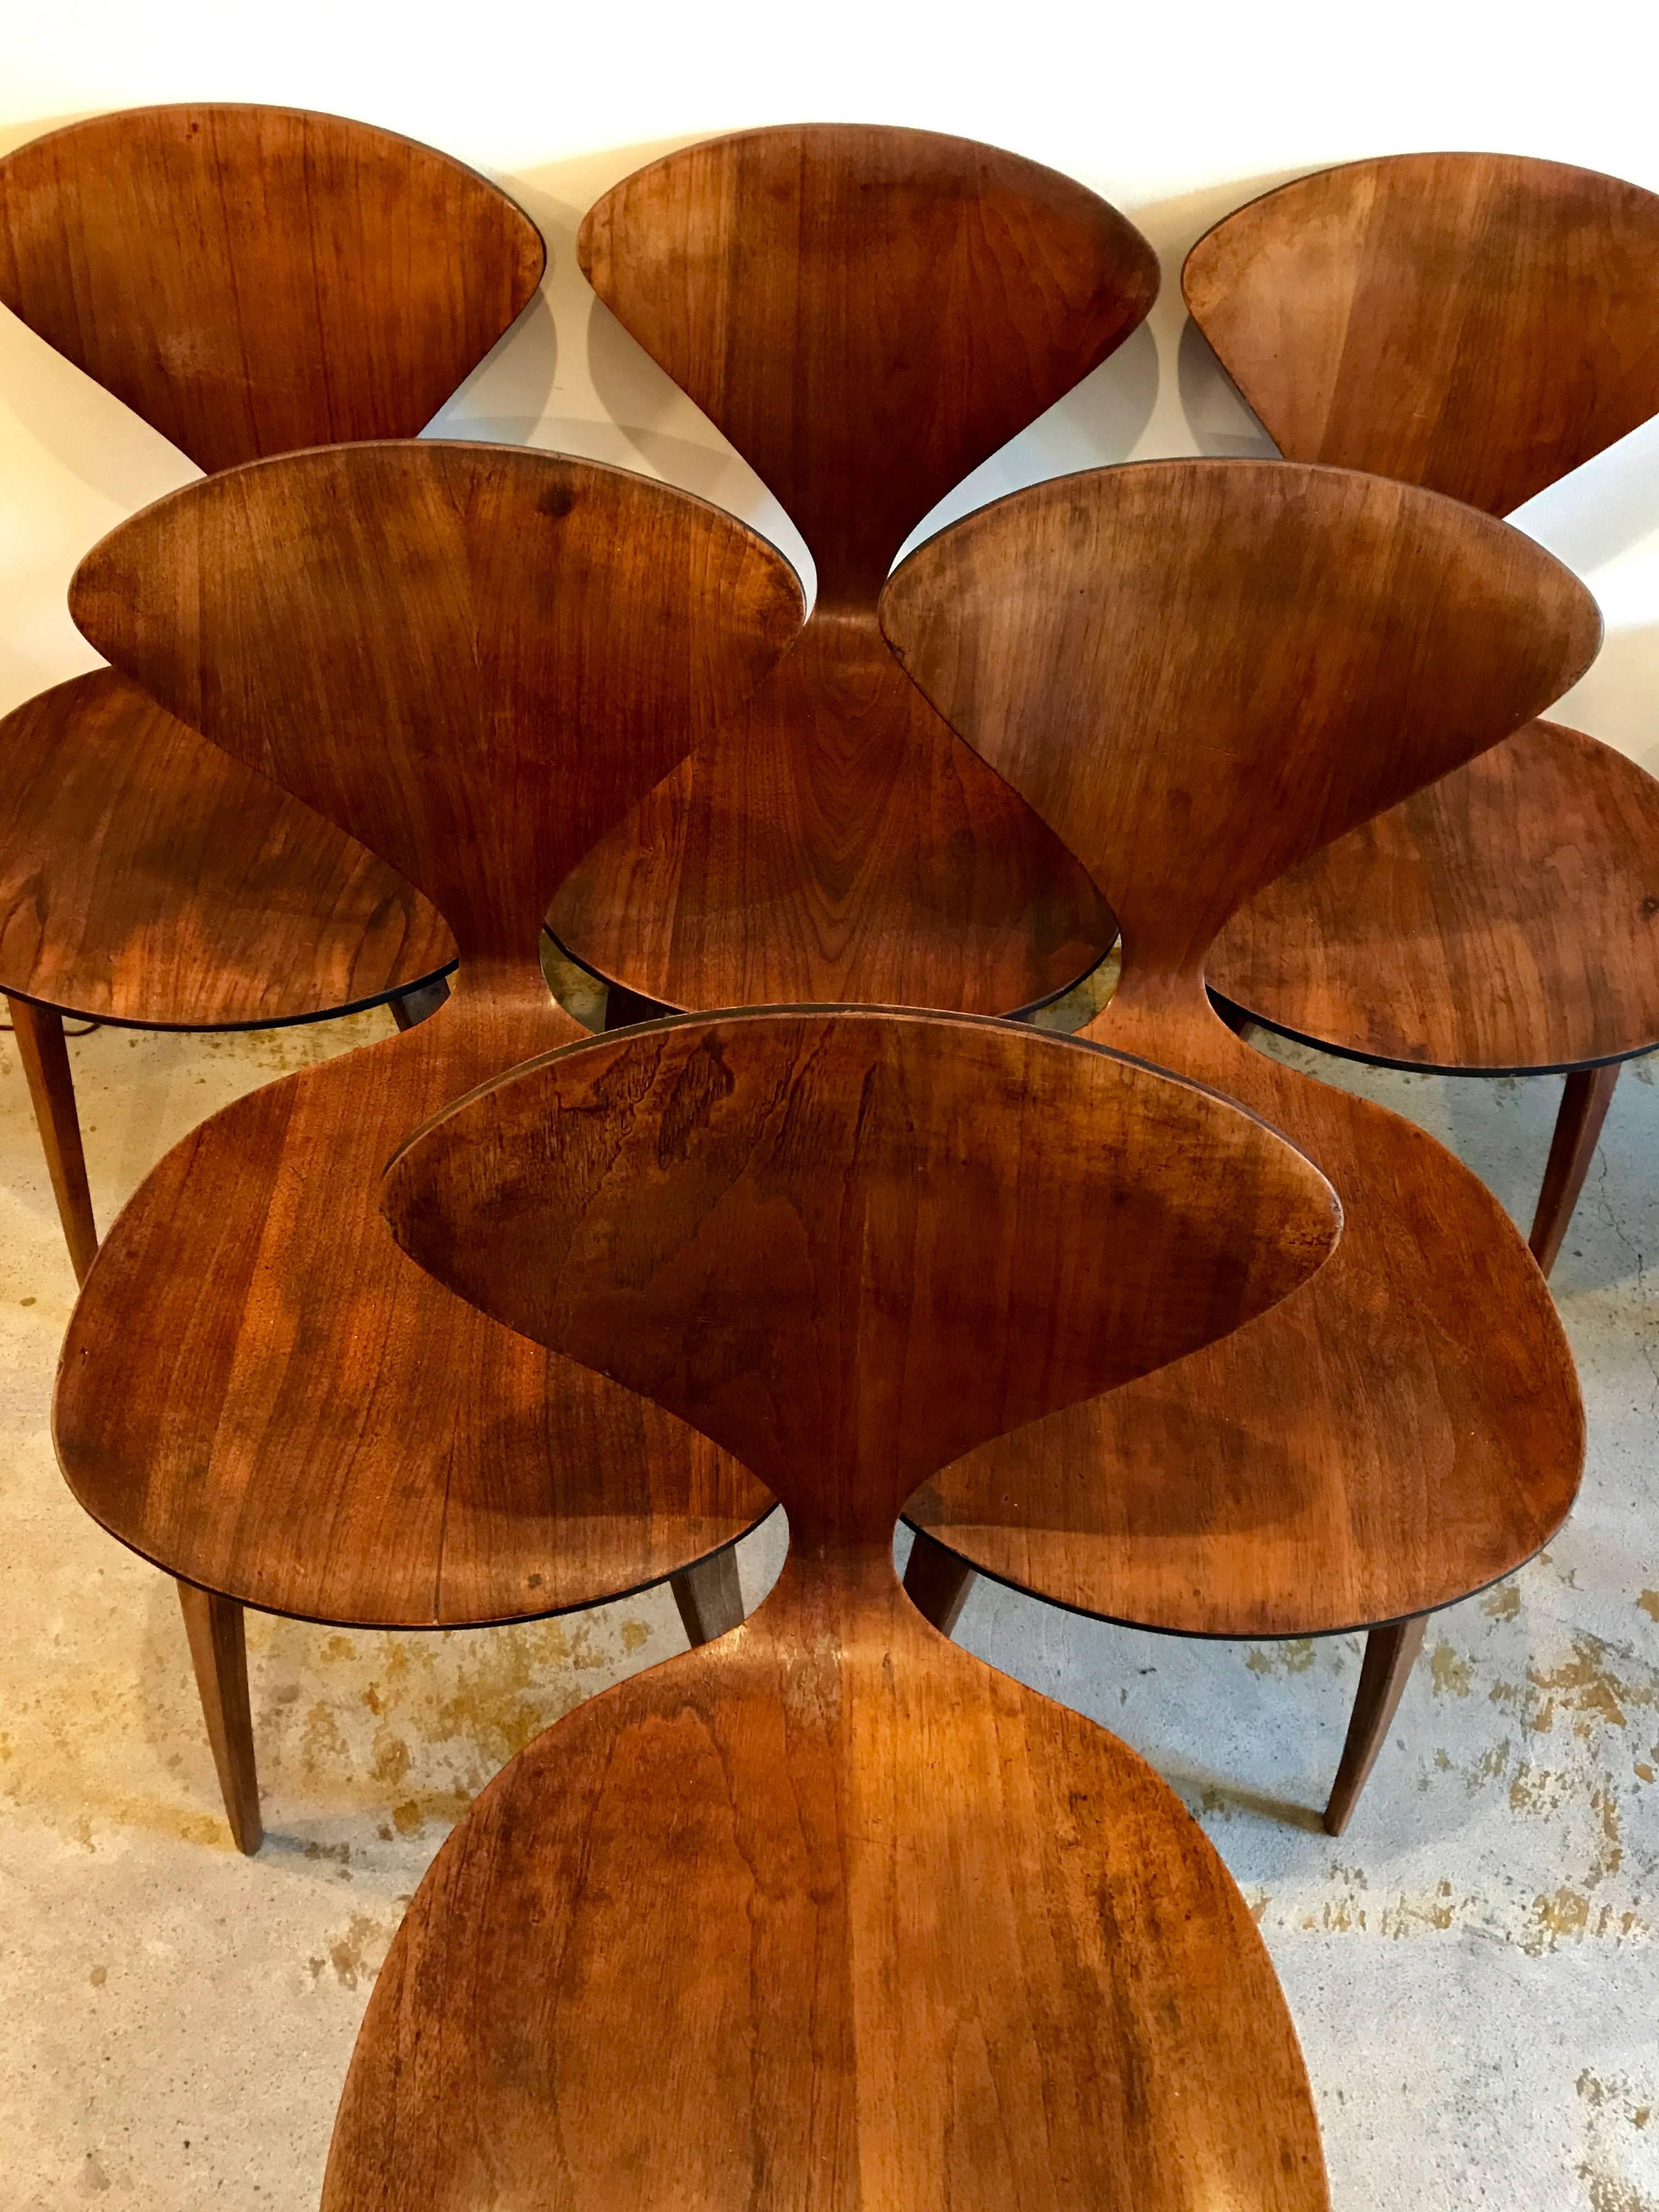 Beautiful set of six Norman Cherner bentwood dining chairs manufactured by Plycraft, 1950s. Wonderful deep, dark walnut grain with aged patina. The chairs have been professionally cleaned but maintain their original finish. All structurally sound,